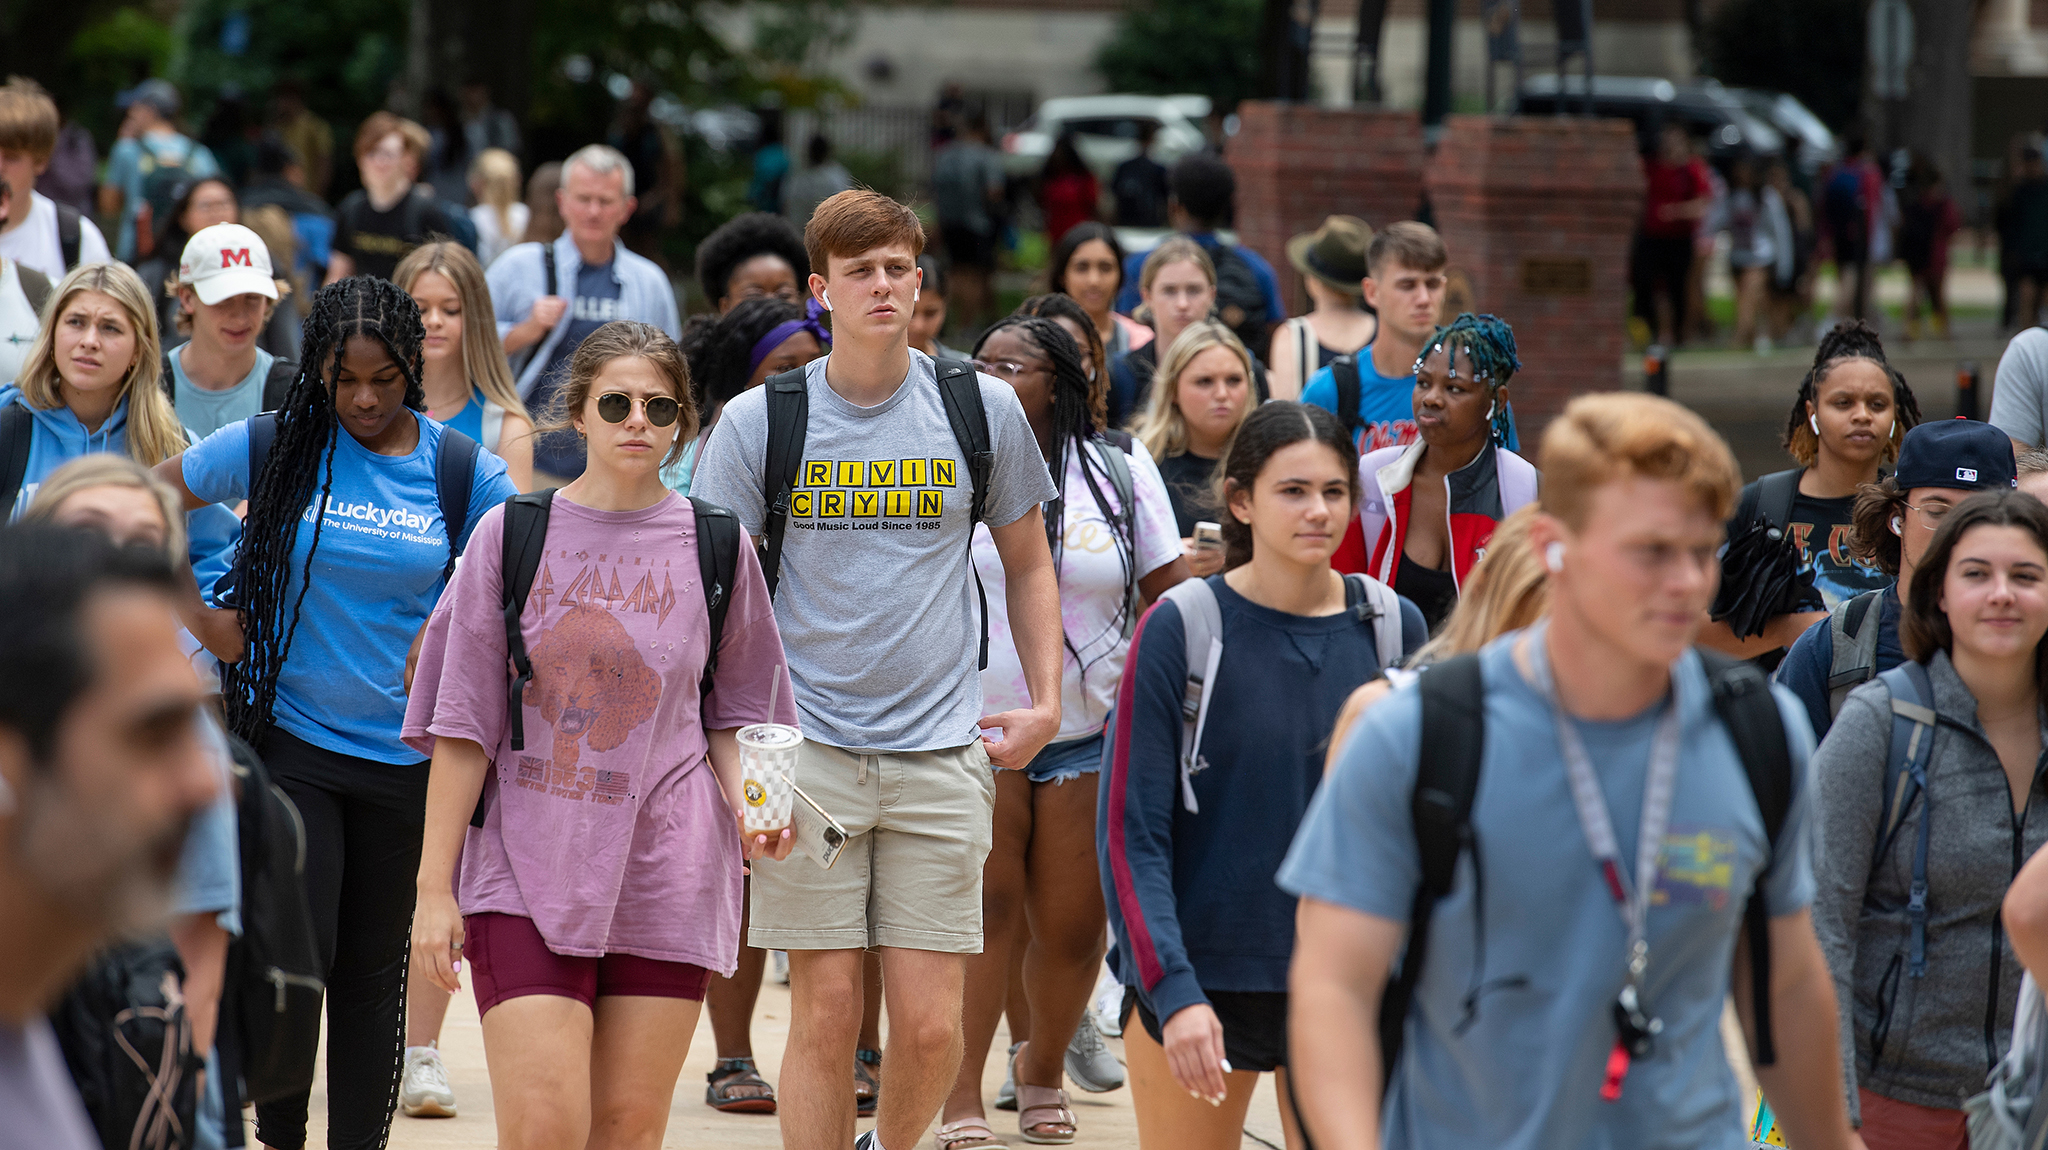 Overall enrollment across the university’s seven campuses for fall 2022 is 22,967, up 5% over last year. Students are attracted to the university by strong academic programs, competitive tuition and an acclaimed campus experience. Photo by Thomas Graning/Ole Miss Digital Imaging Services